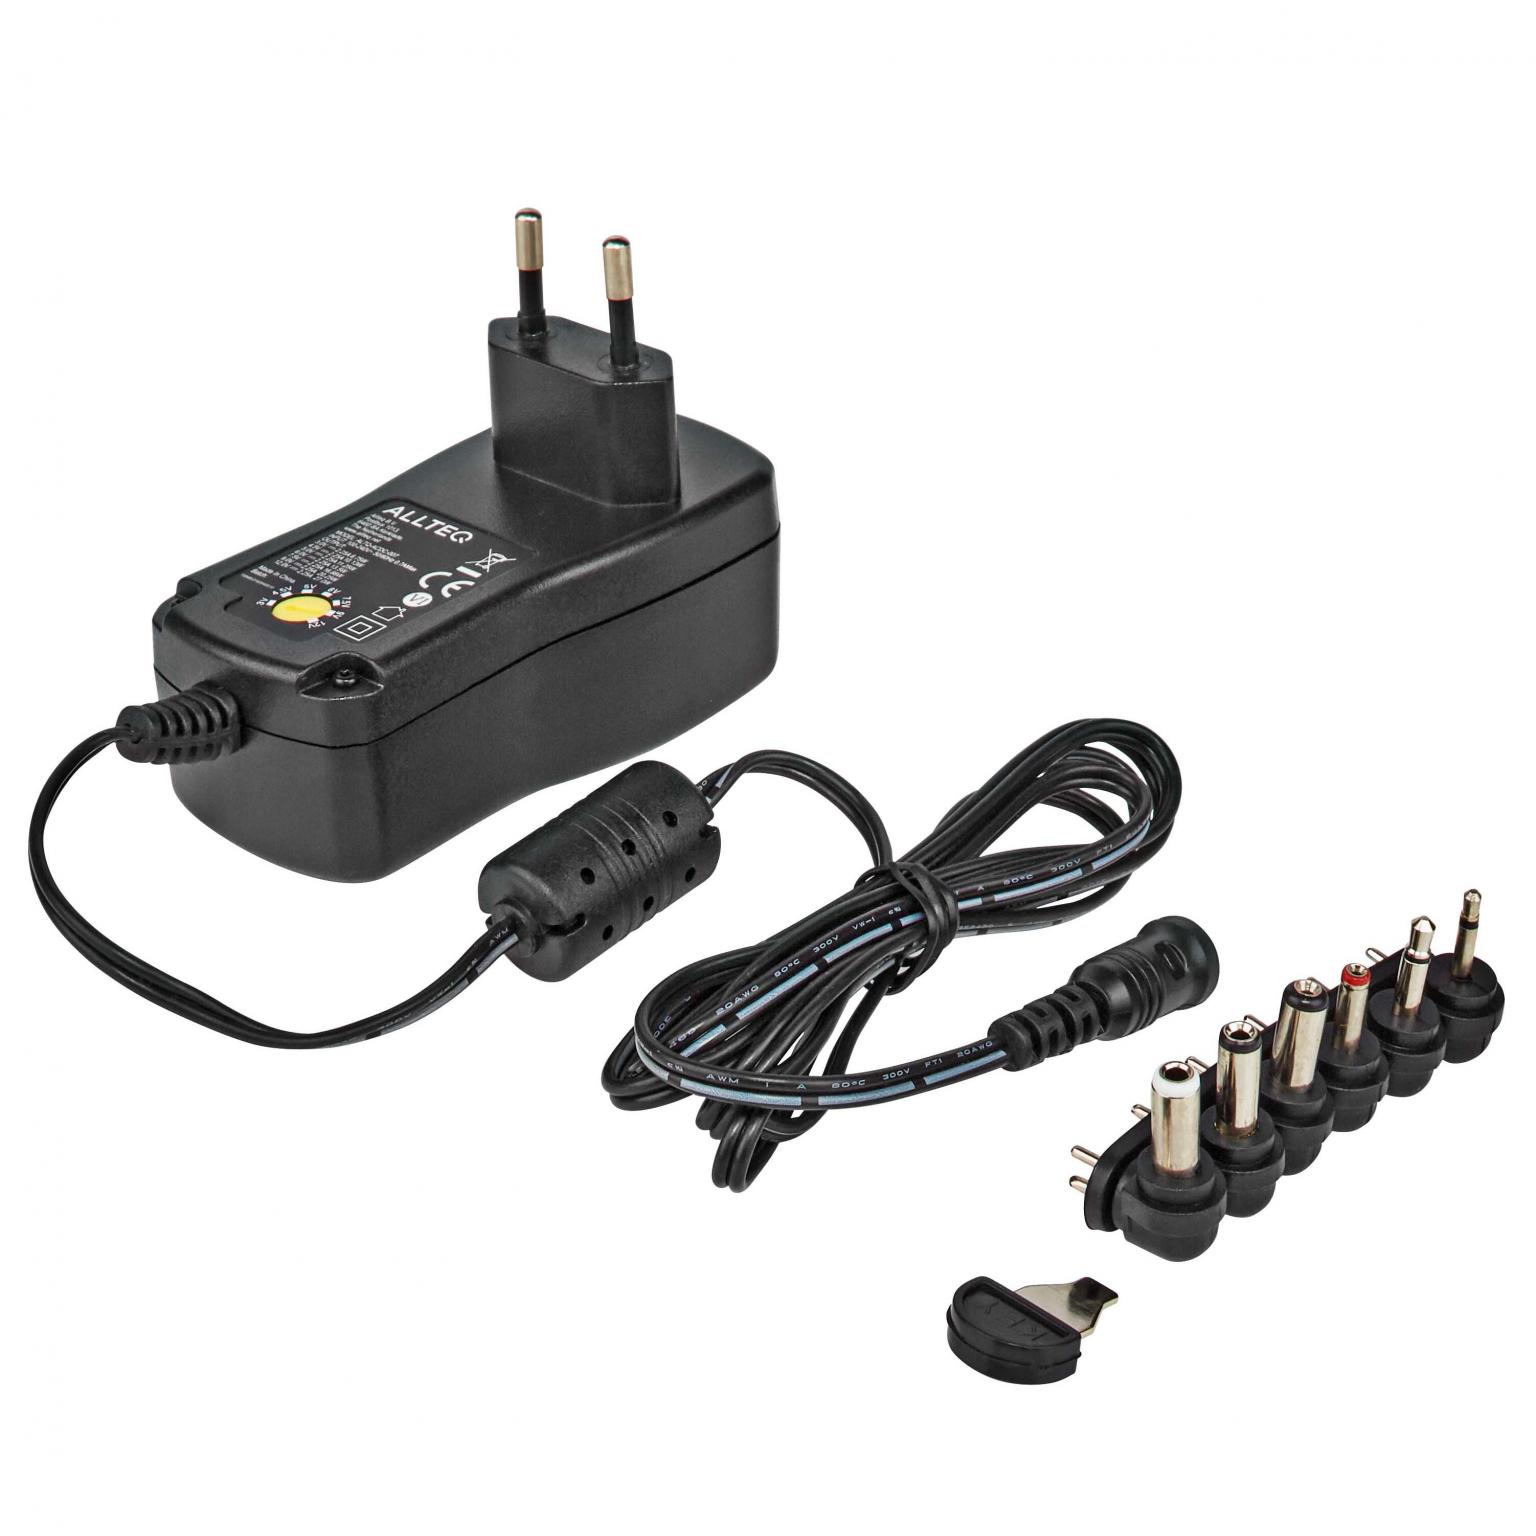 Universele AC/DC adapter - Allteq